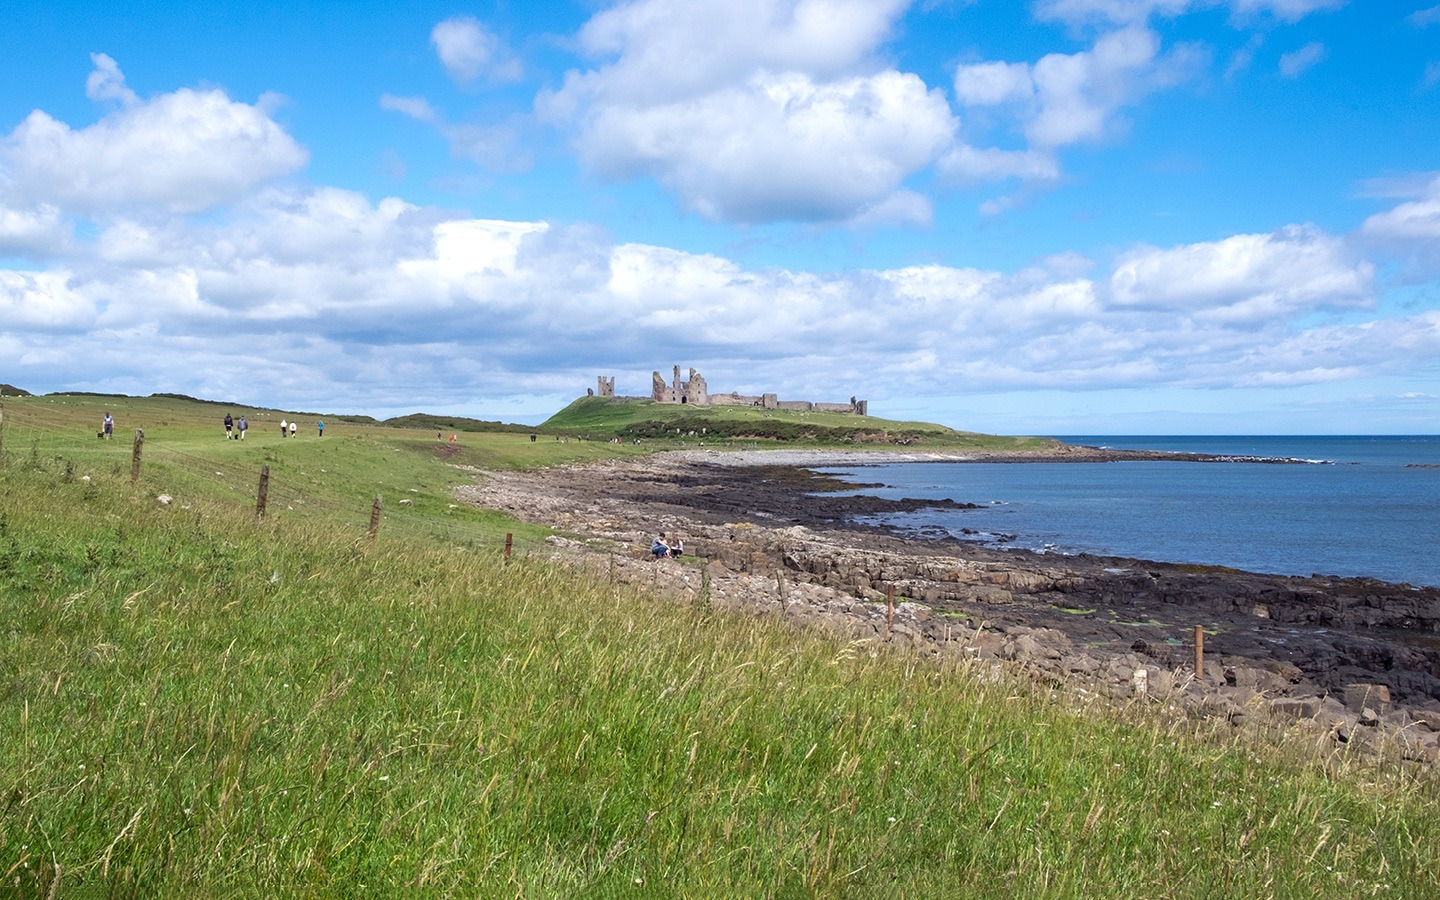 Walking along the coast path from Craster to Dunstanburgh